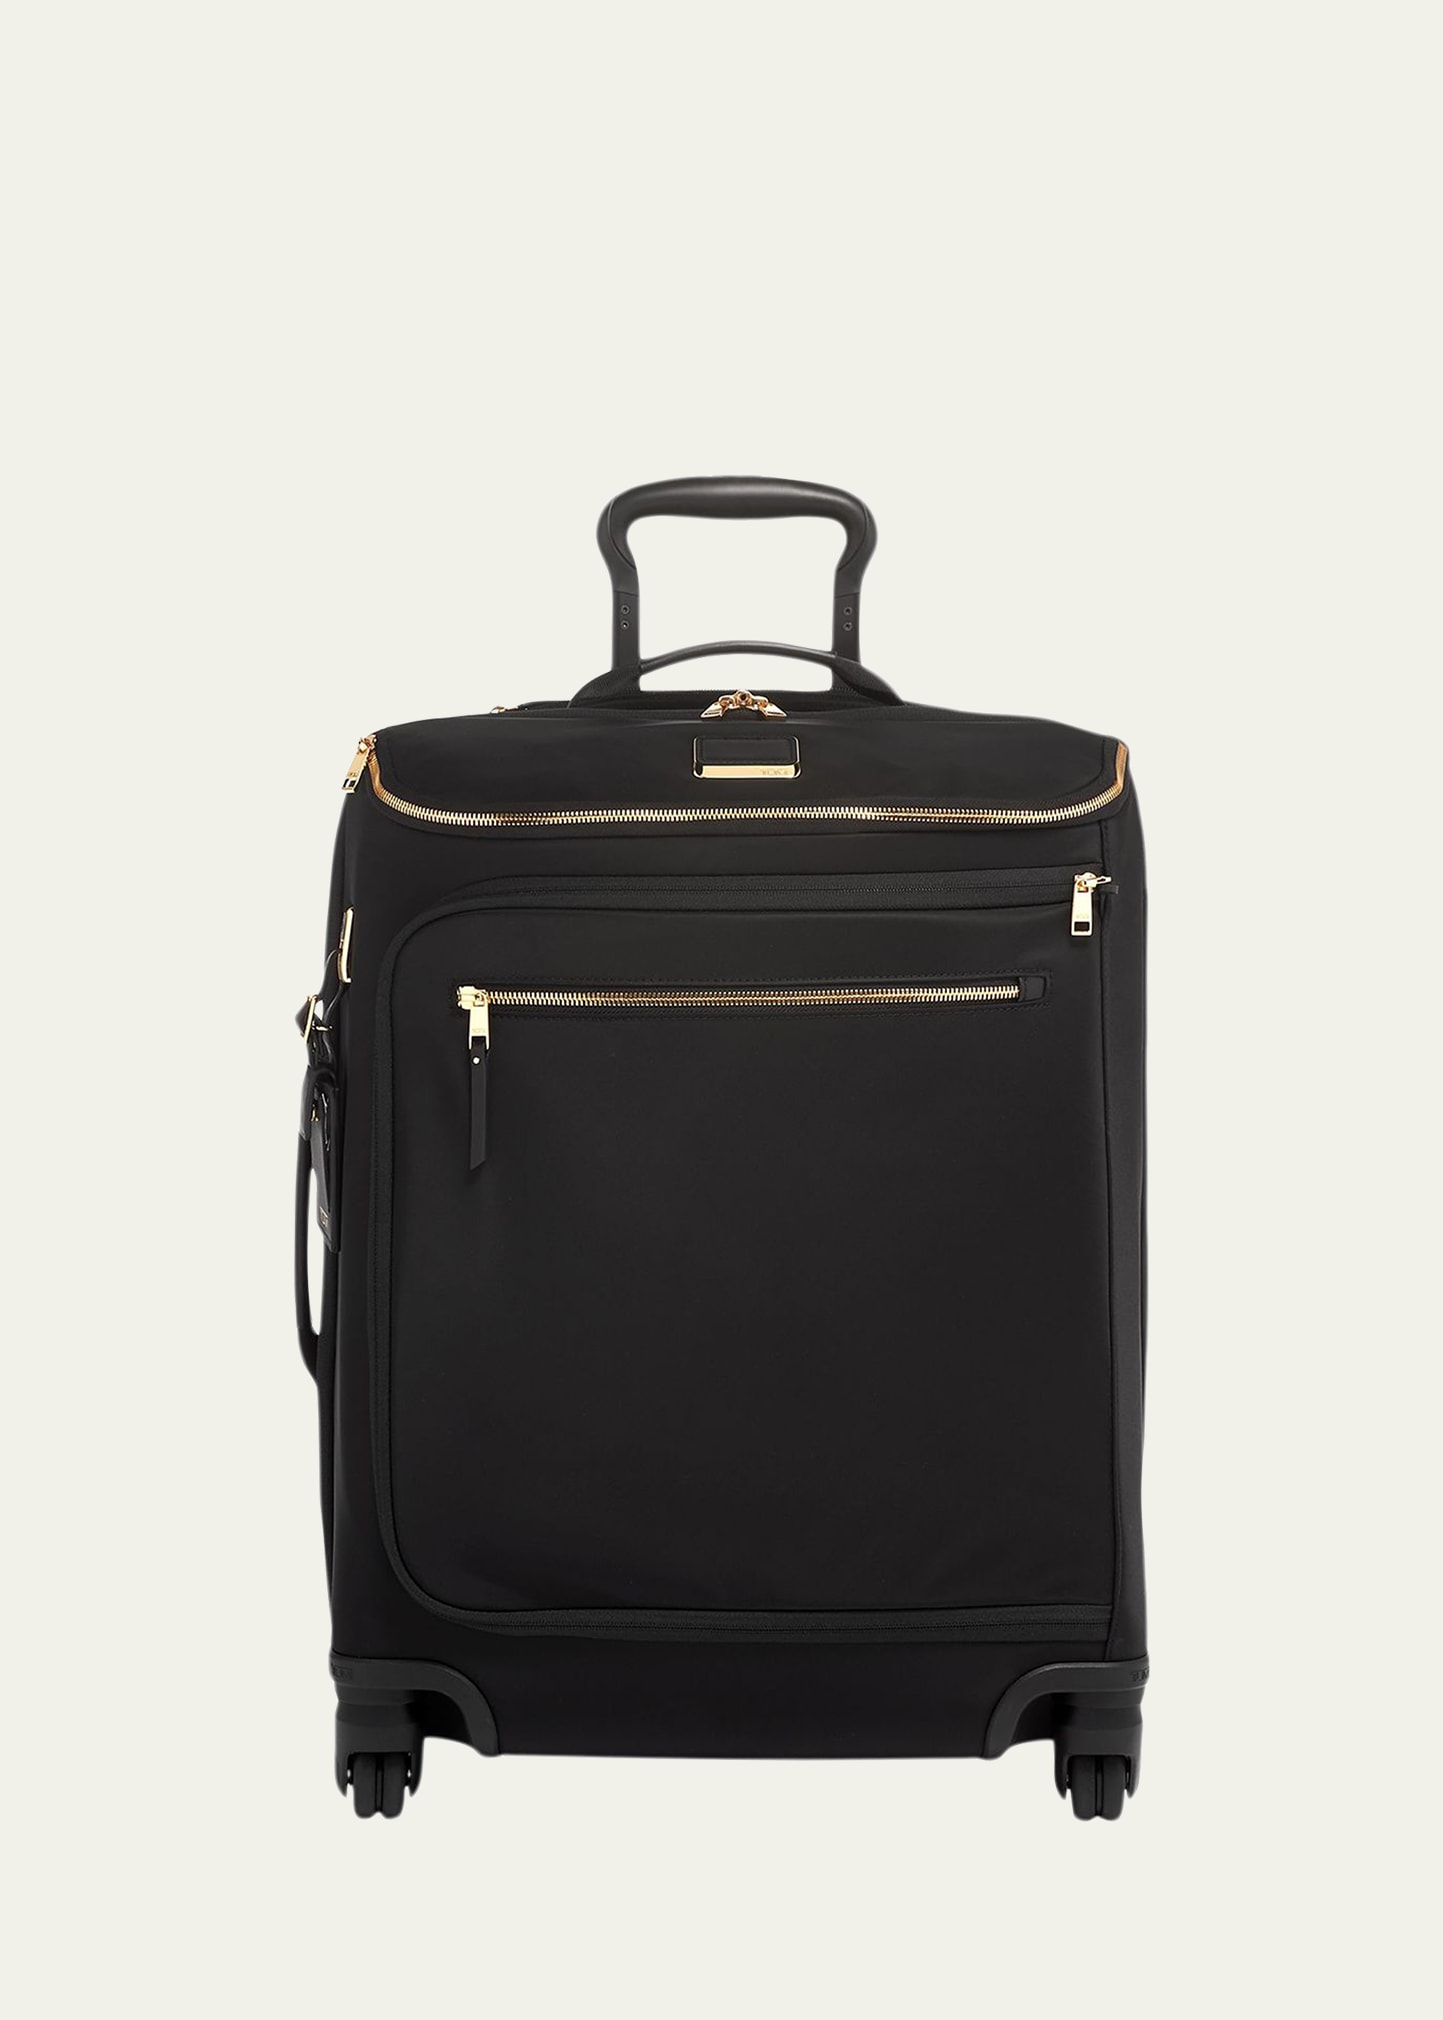 Leger Continental Carry-On Luggage